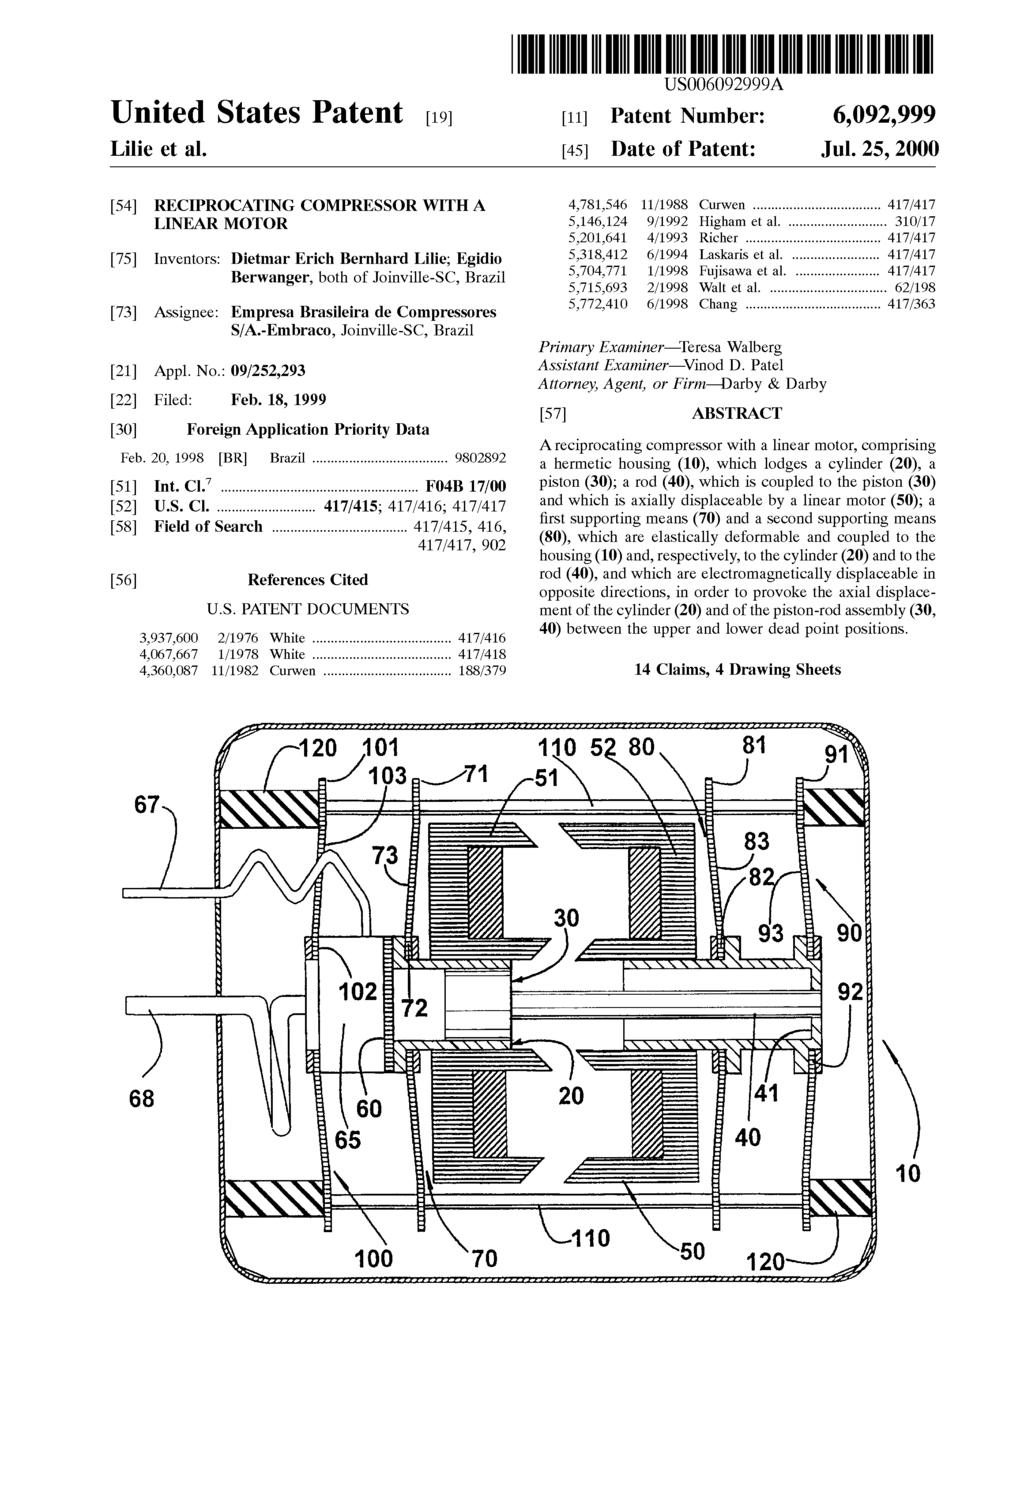 i & RS USOO6092999A United States Patent (19) 11 Patent Number: 6,092,999 Lilie et al. (45) Date of Patent: Jul. 25, 2000 54 RECIPROCATING COMPRESSOR WITH A 4,781,546 11/1988 Curwen.